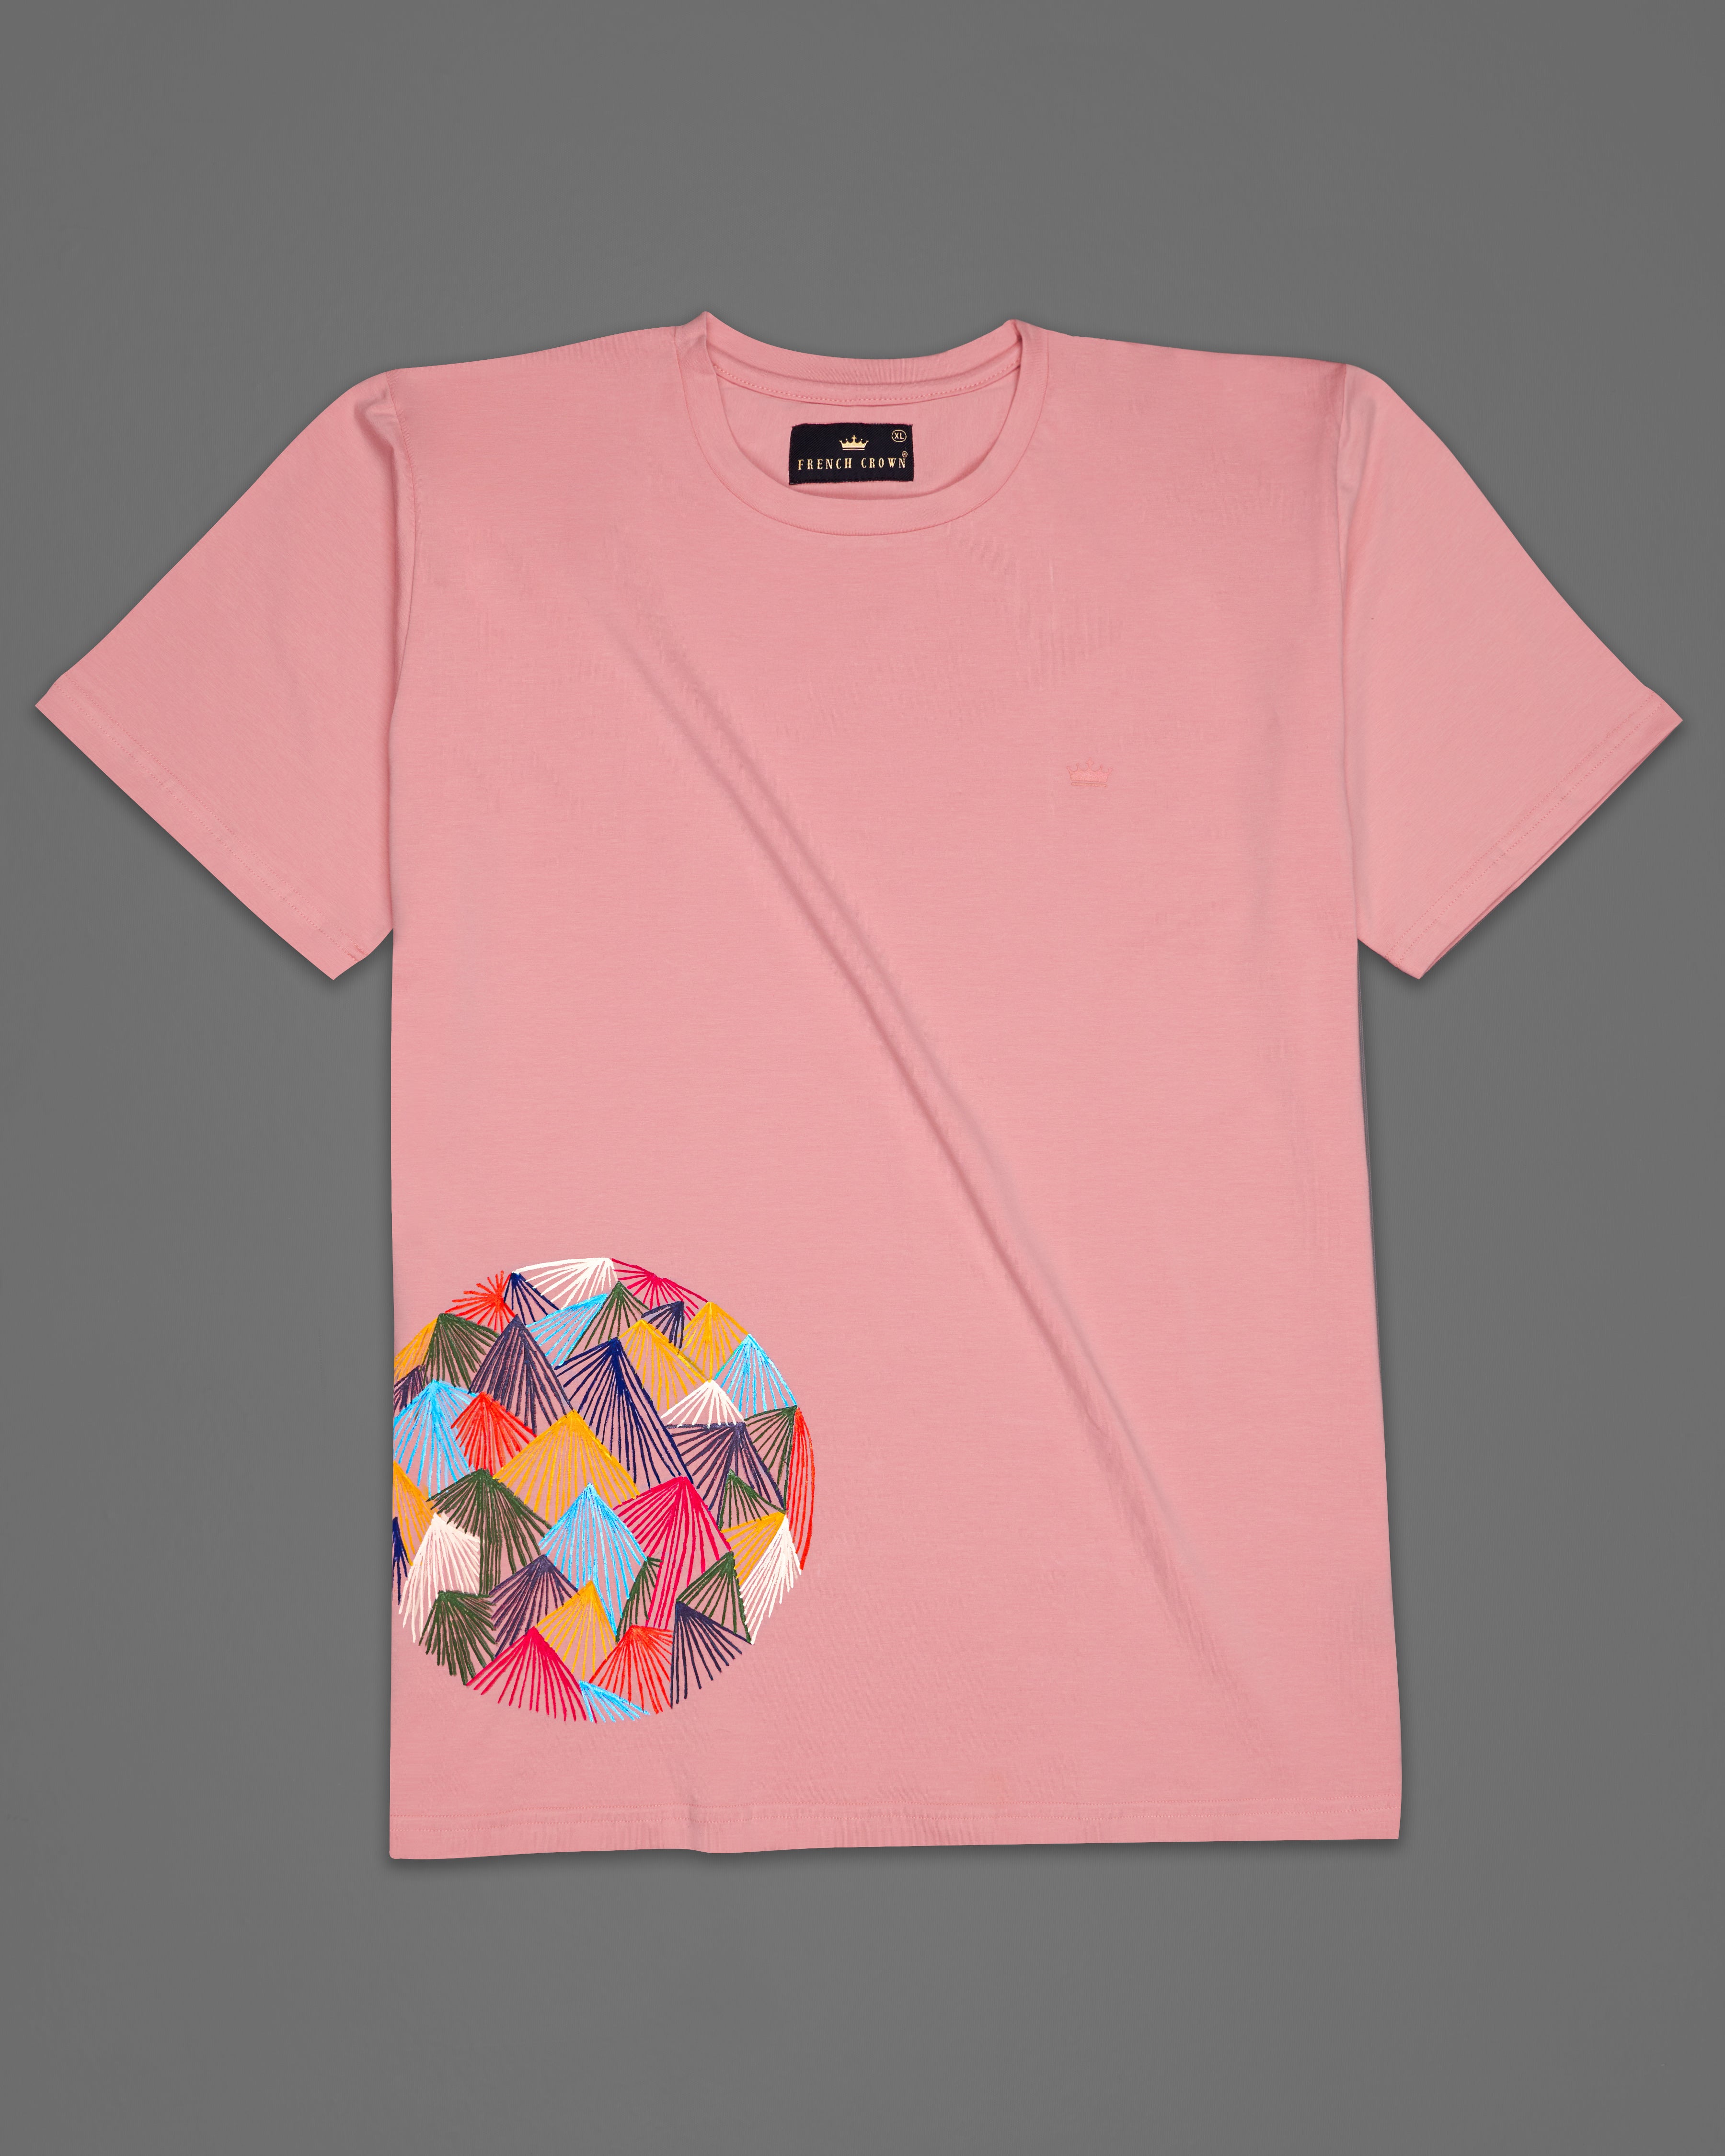 Light Thulian Pink with Multicolour Mountain Like Hand Painted Organic Cotton T-shirt T-shirt TS007-W03-S, TS007-W03-M, TS007-W03-L, TS007-W03-XL, TS007-W03-XXL